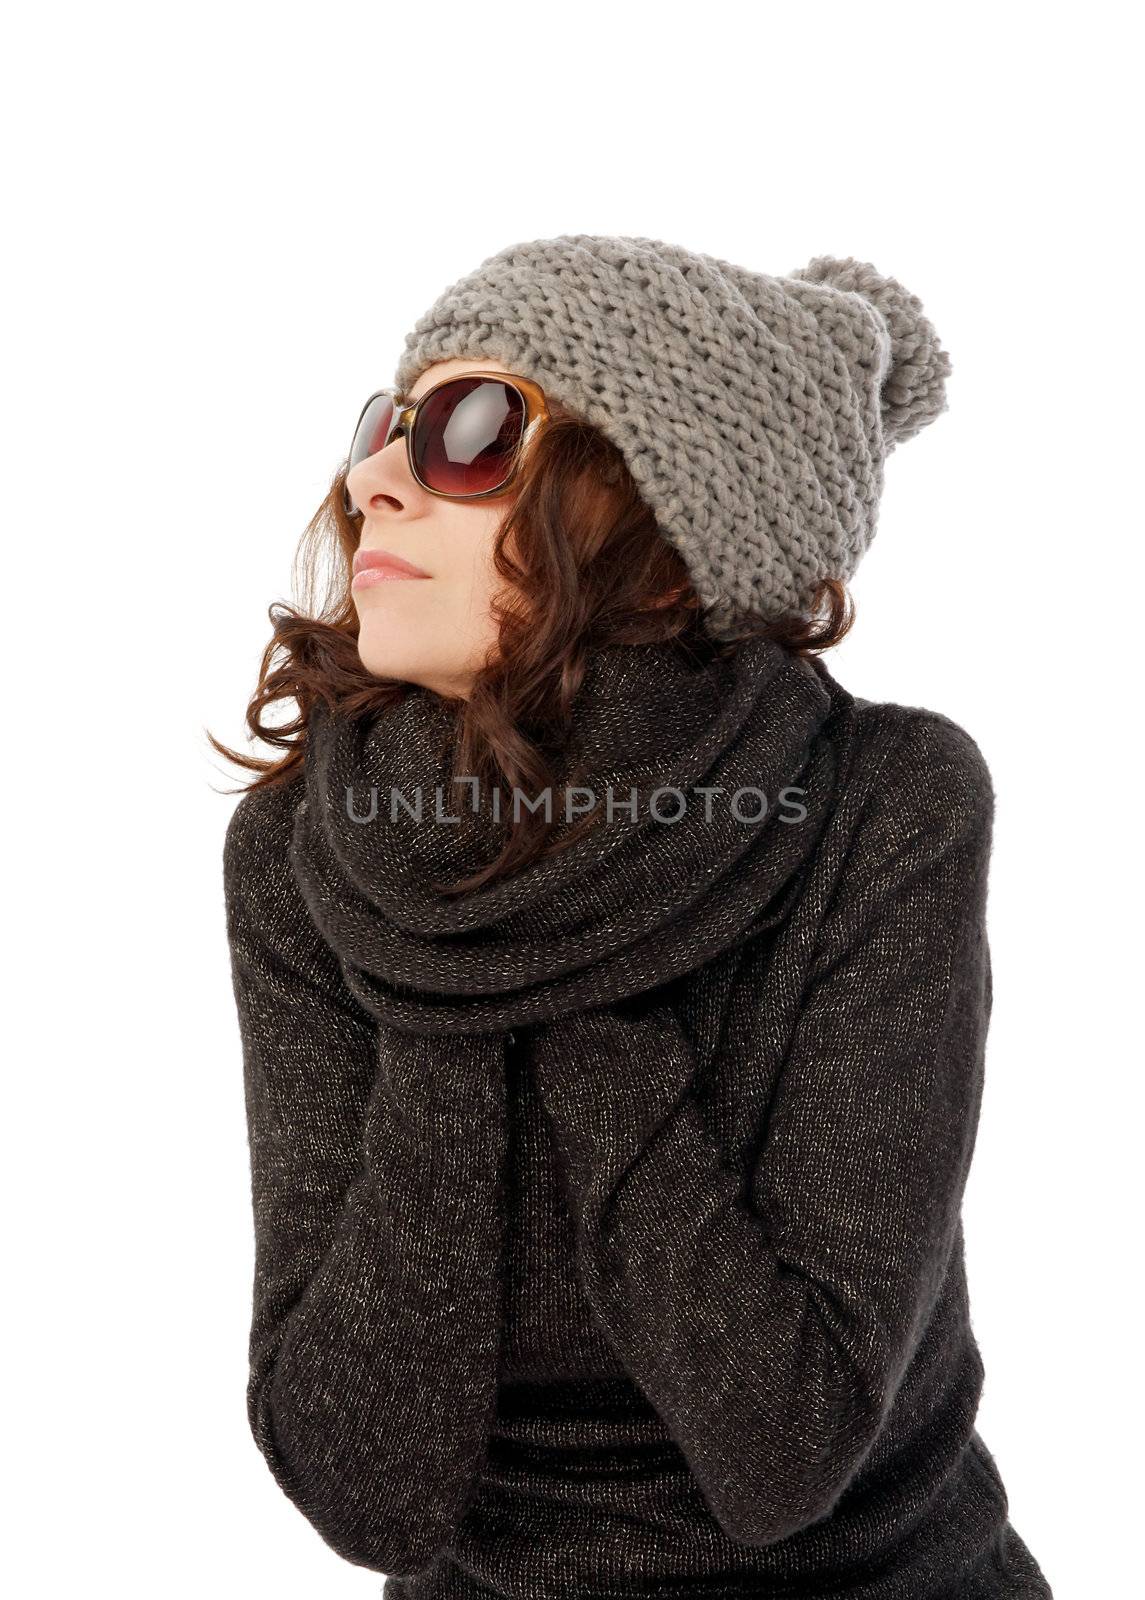 Beautiful Girl in Knitted Hat and Sunglasses Warms Hands into her Warm Sweater closeup on white background